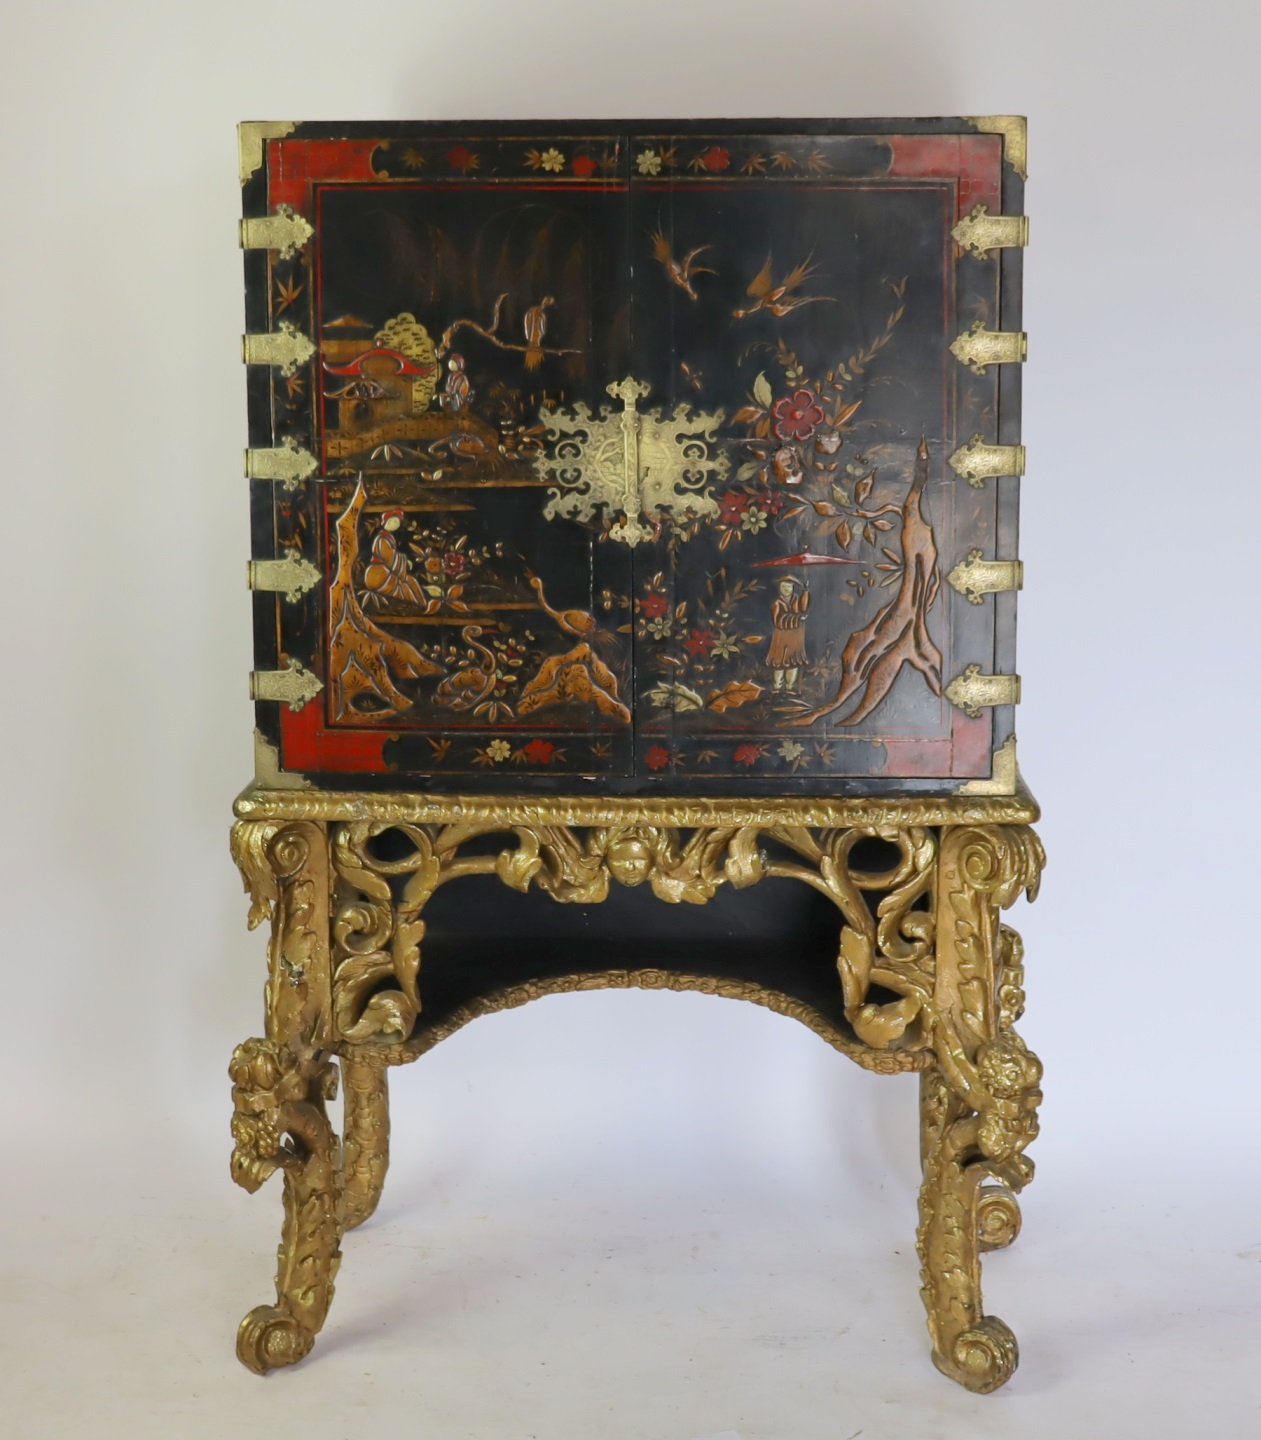 ANTIQUE CHINOISERIE DECORATED LACQUERED